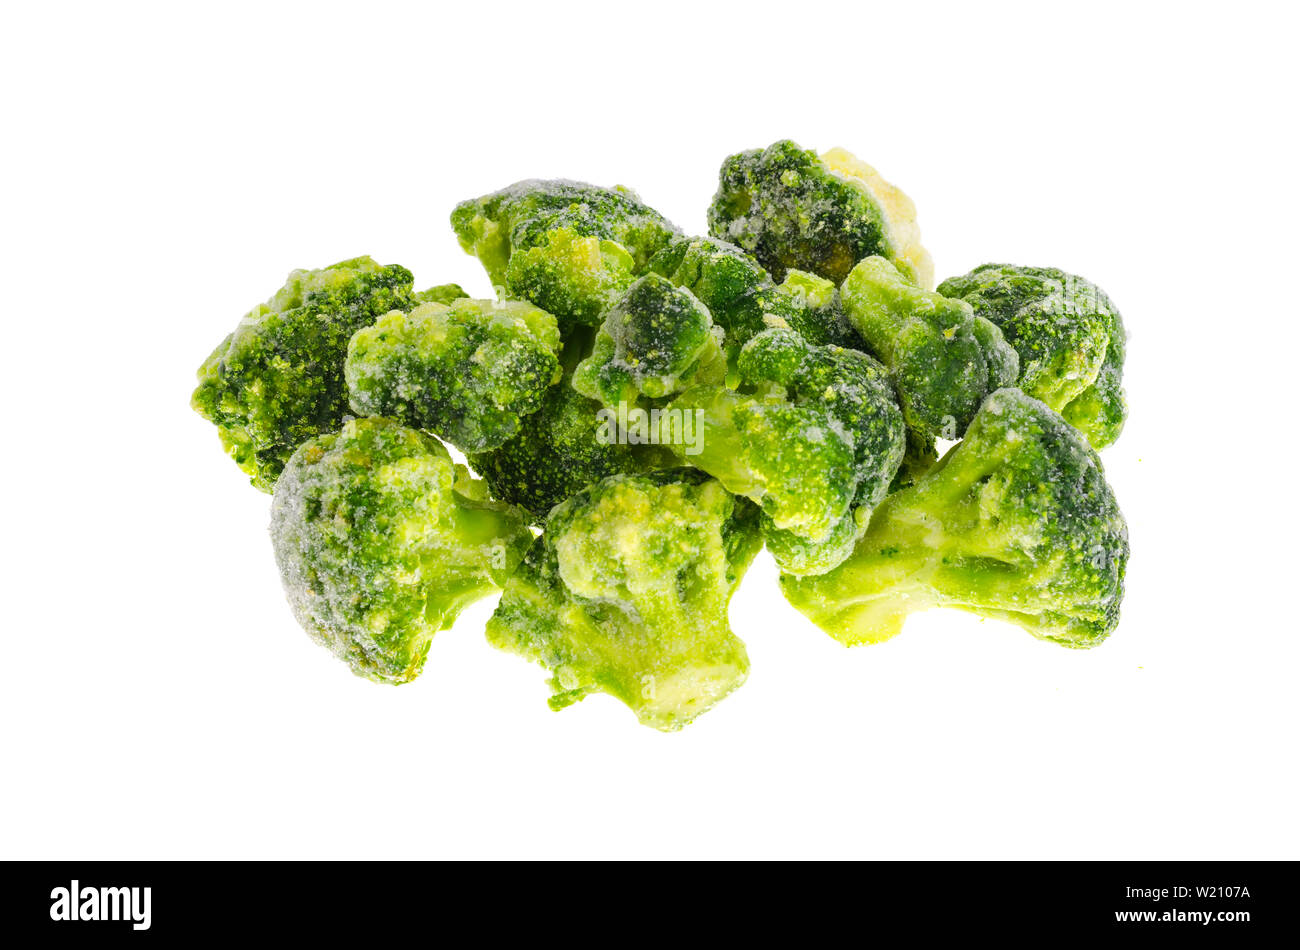 Bunch of frozen broccoli isolated on white background. Stock Photo